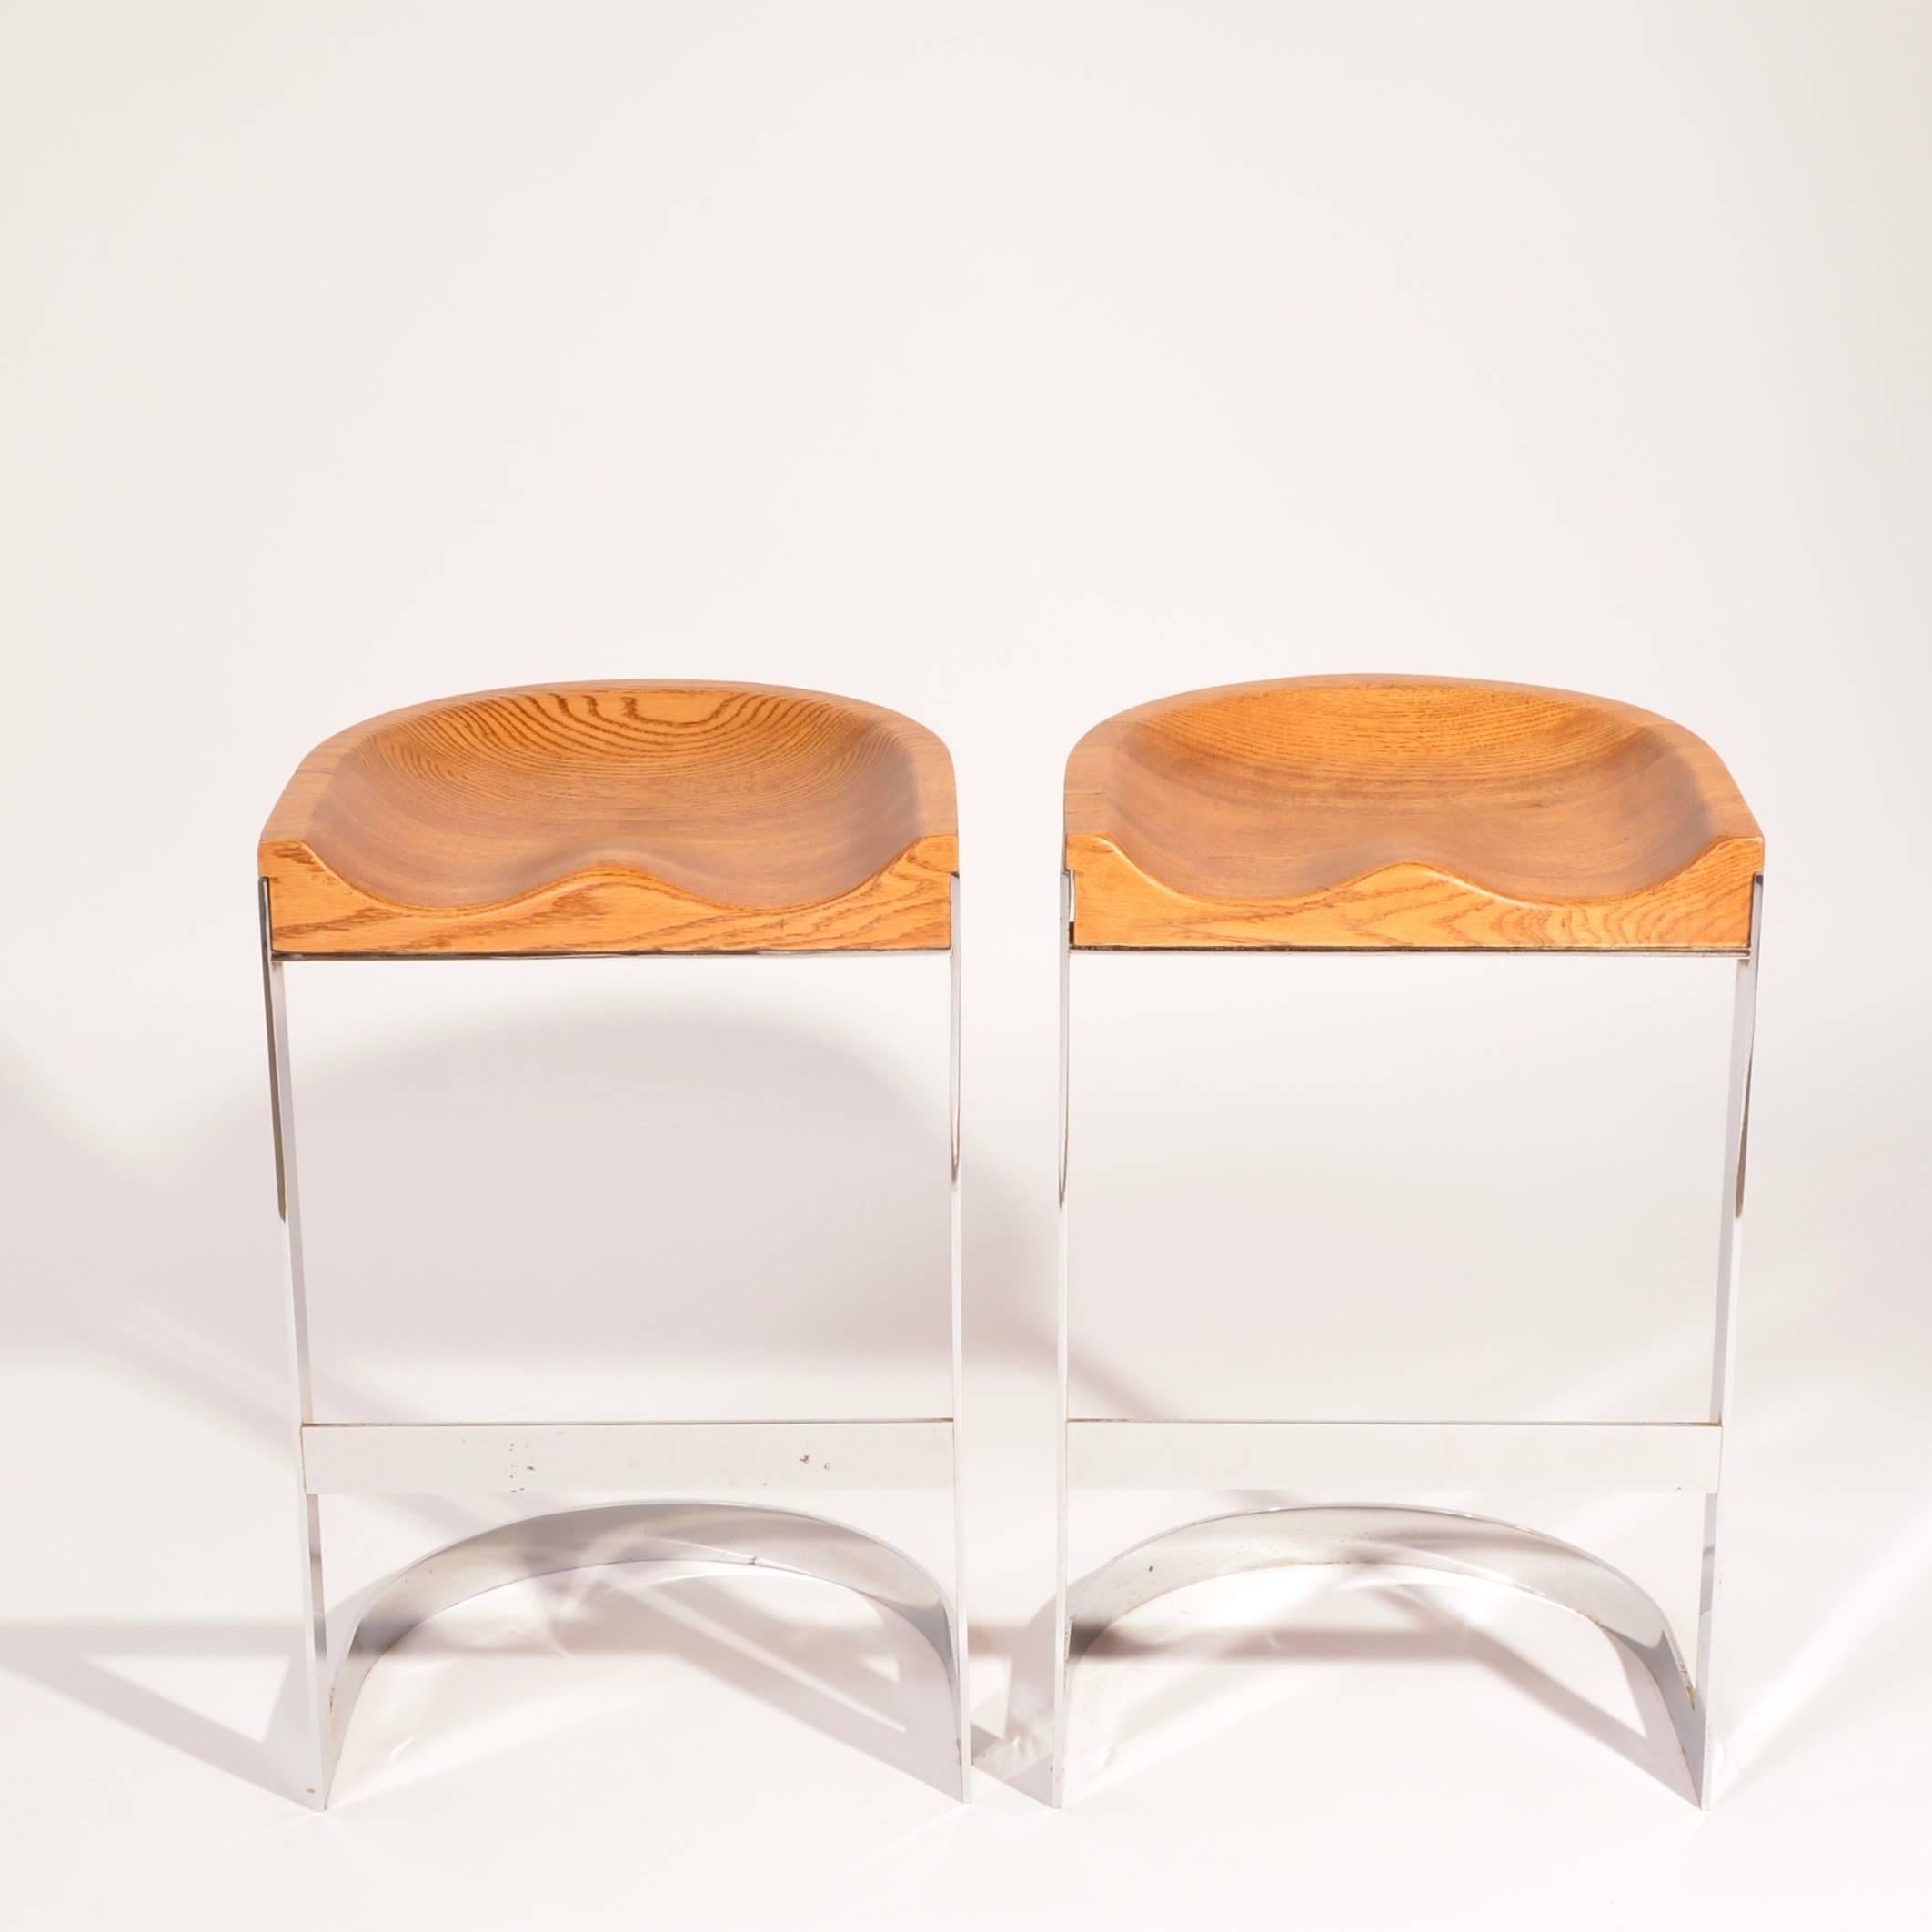 Light oak and chrome are united to create these chic counter stools by Warren Bacon.  Can also be sold as set of 4 or 6.